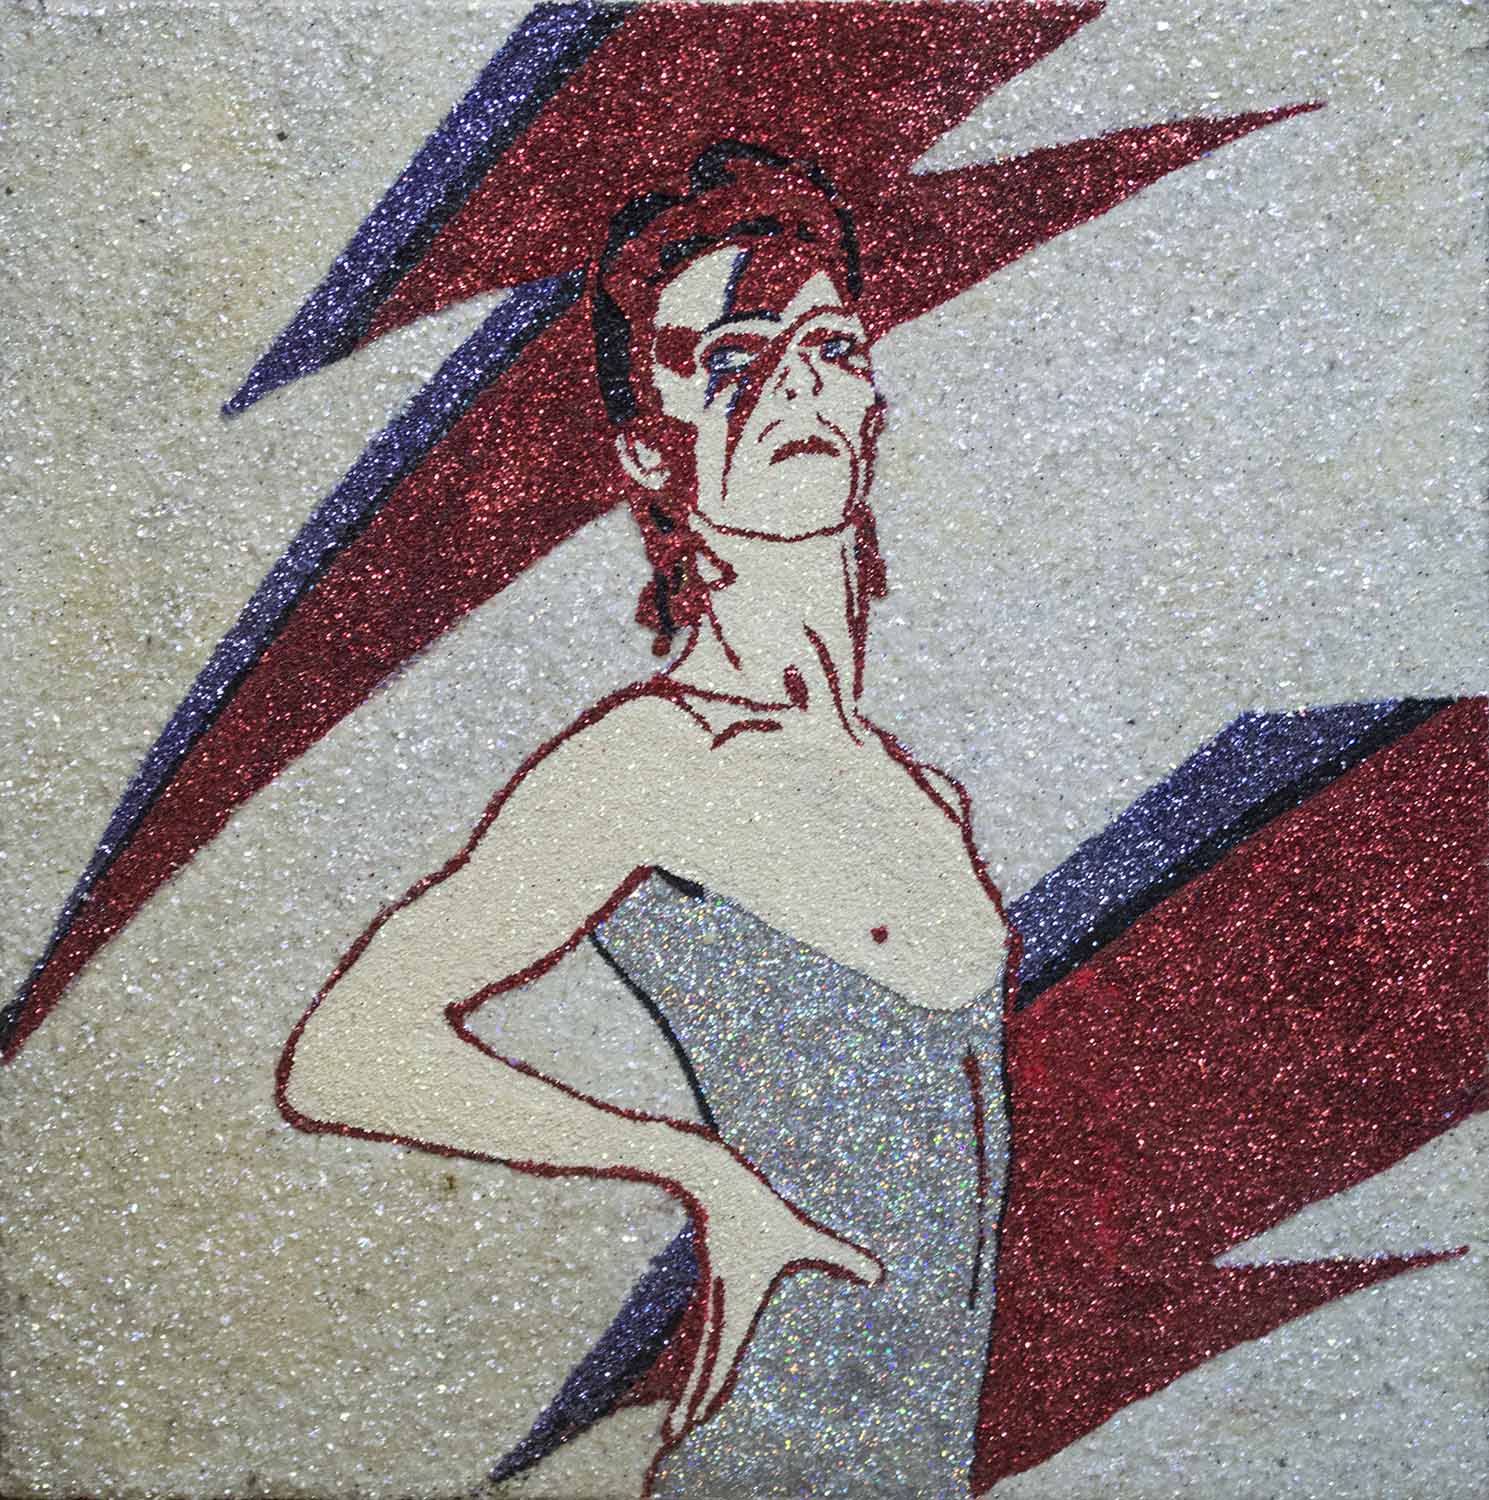 HARI DERUSCH 'David Bowie', 2010, glitter on canvas, signed and dated verso, 61cm x 61cm.